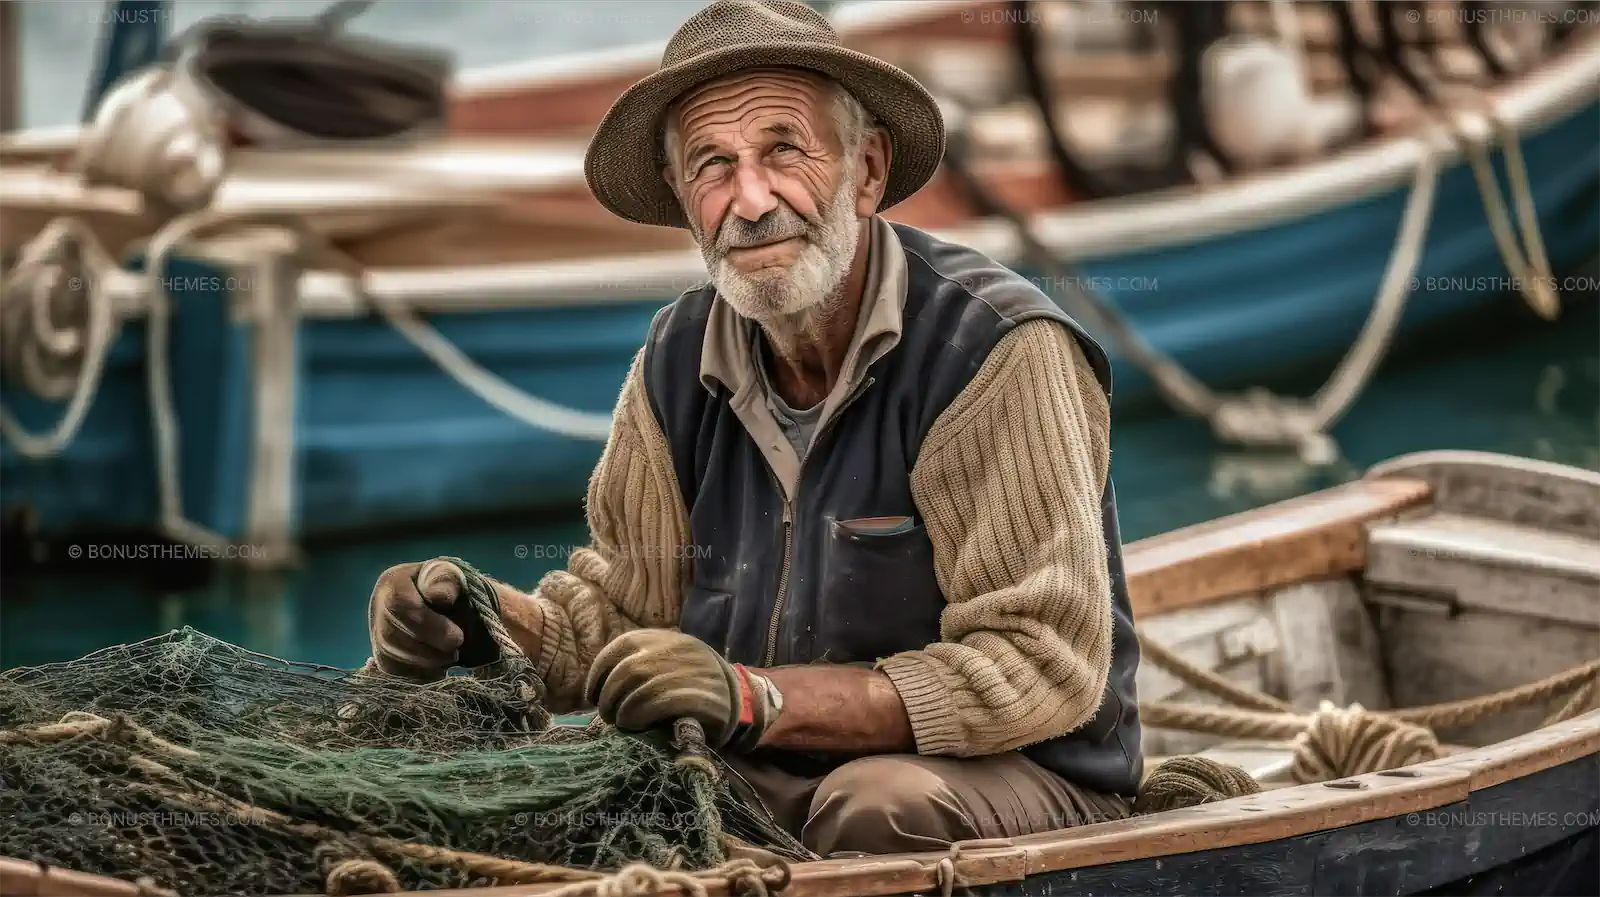 A fisherman sitting in a boat